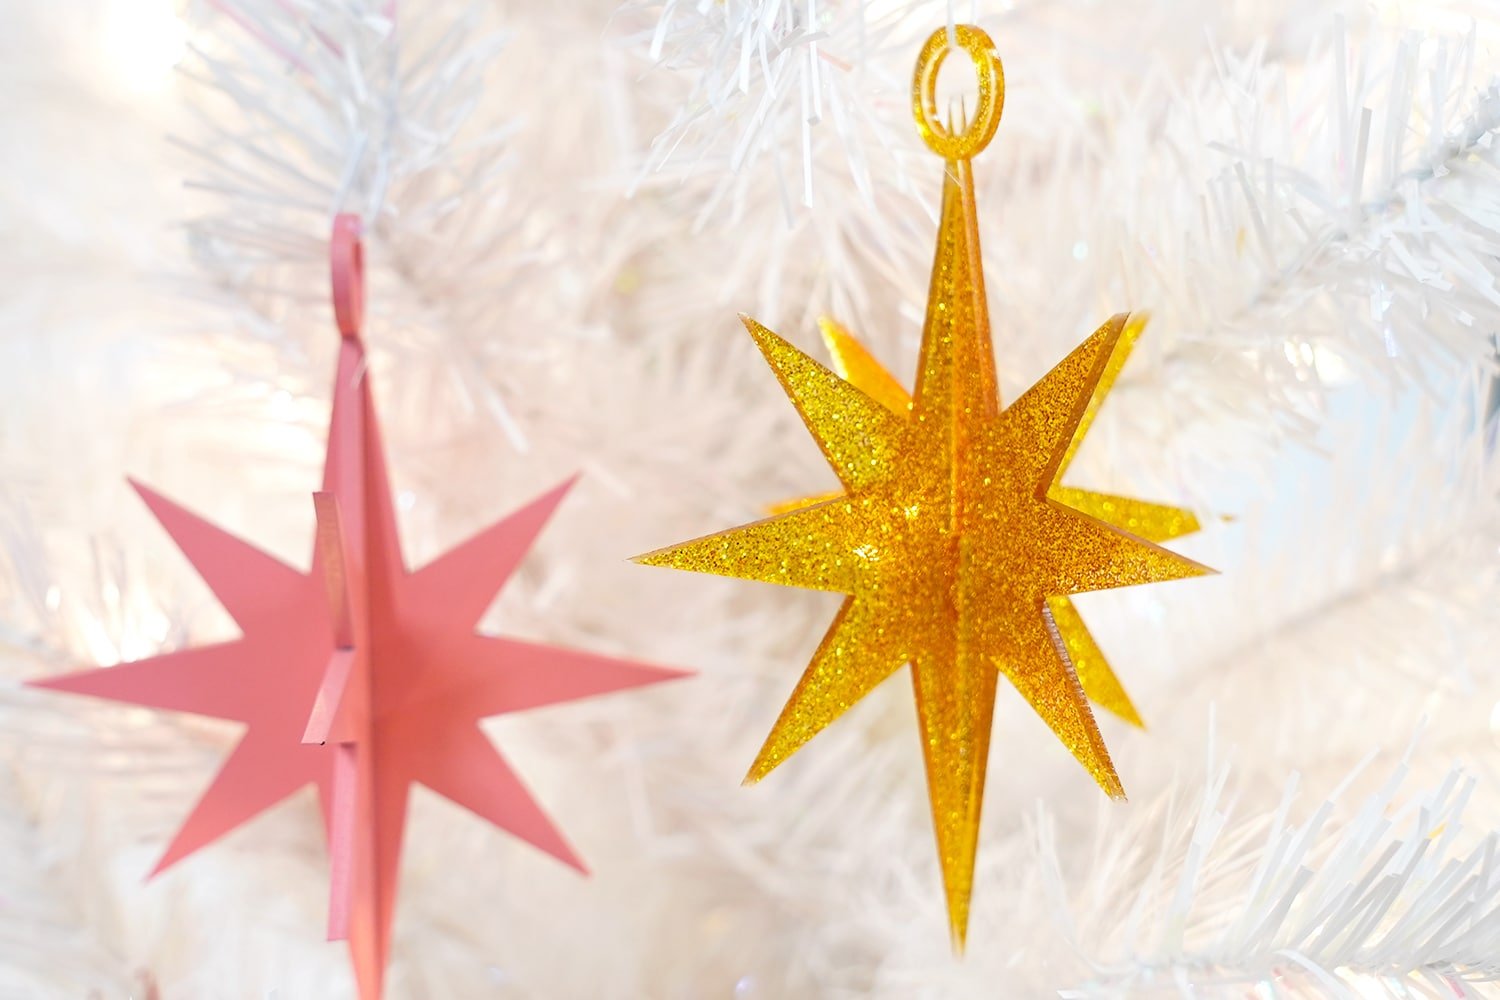 Gold glitter acrylic 3D star ornament on a white Christmas tree with pink star in background